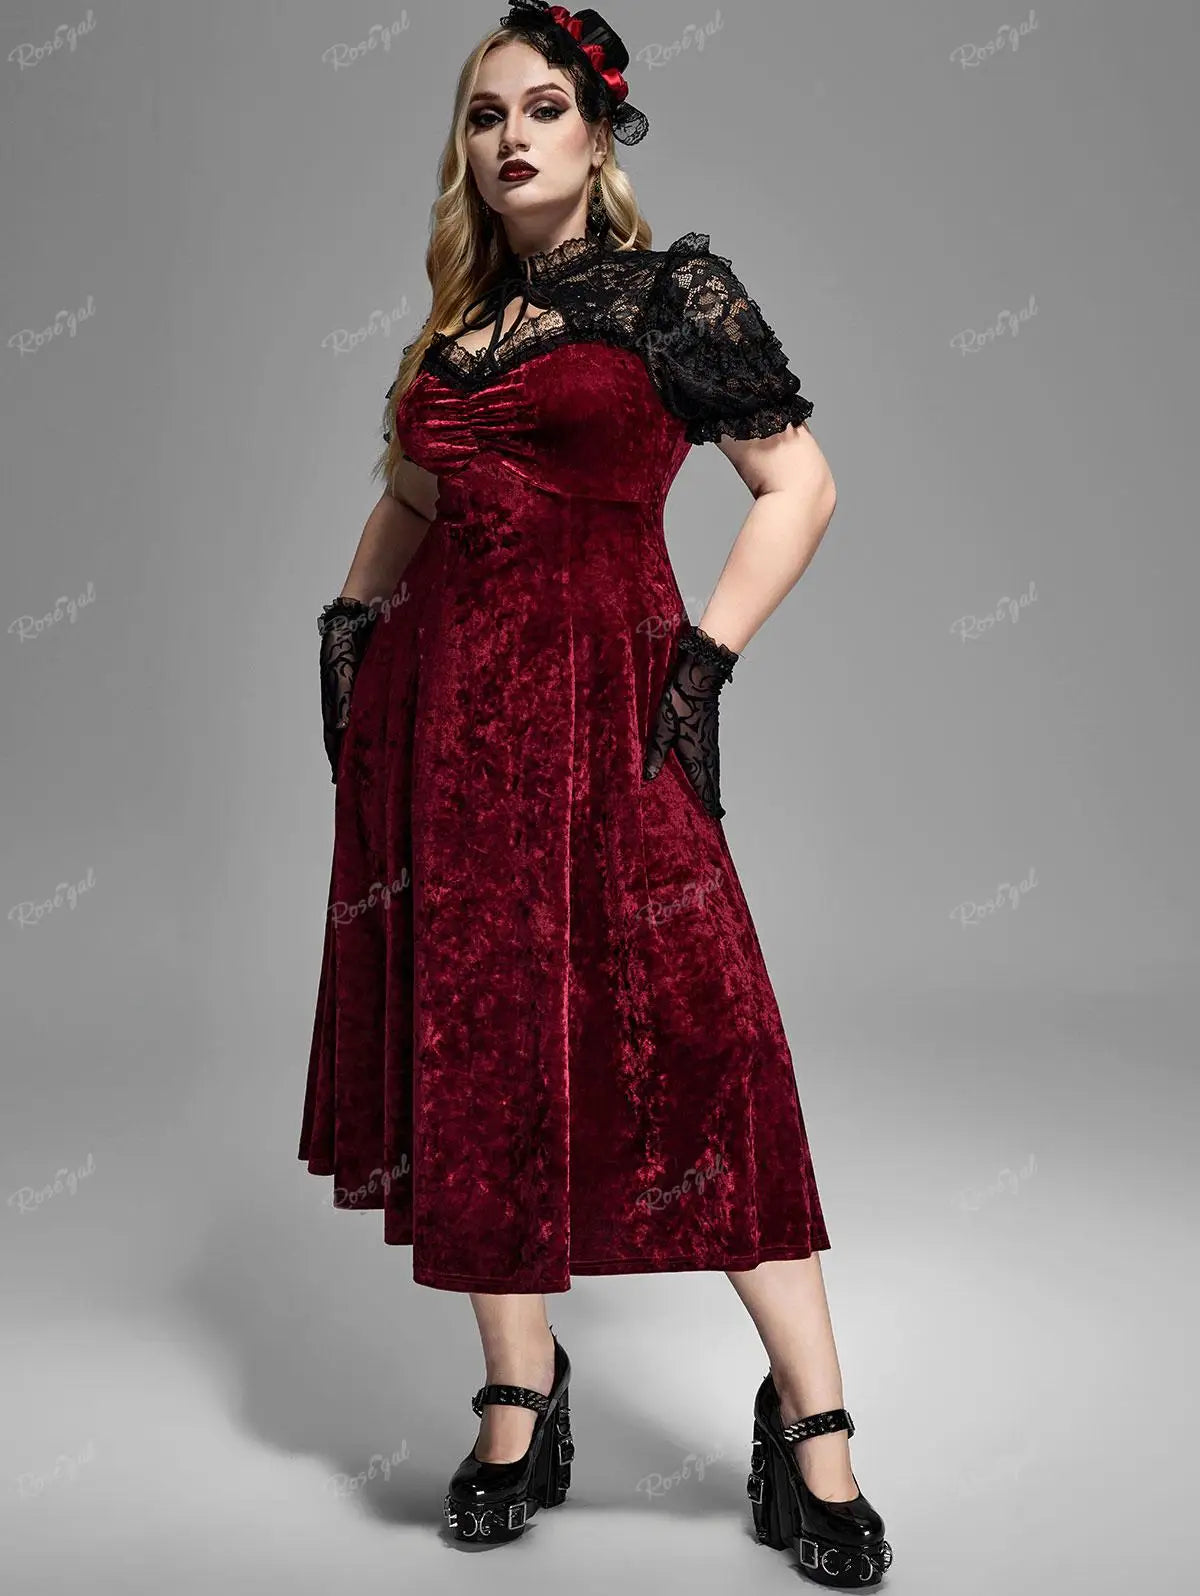 Plus Size Elegant Women's Dresses Gothic Lace Panel Cut Out Ruched Cinched Velvet Party Dress Puff Sleeves Vestidos